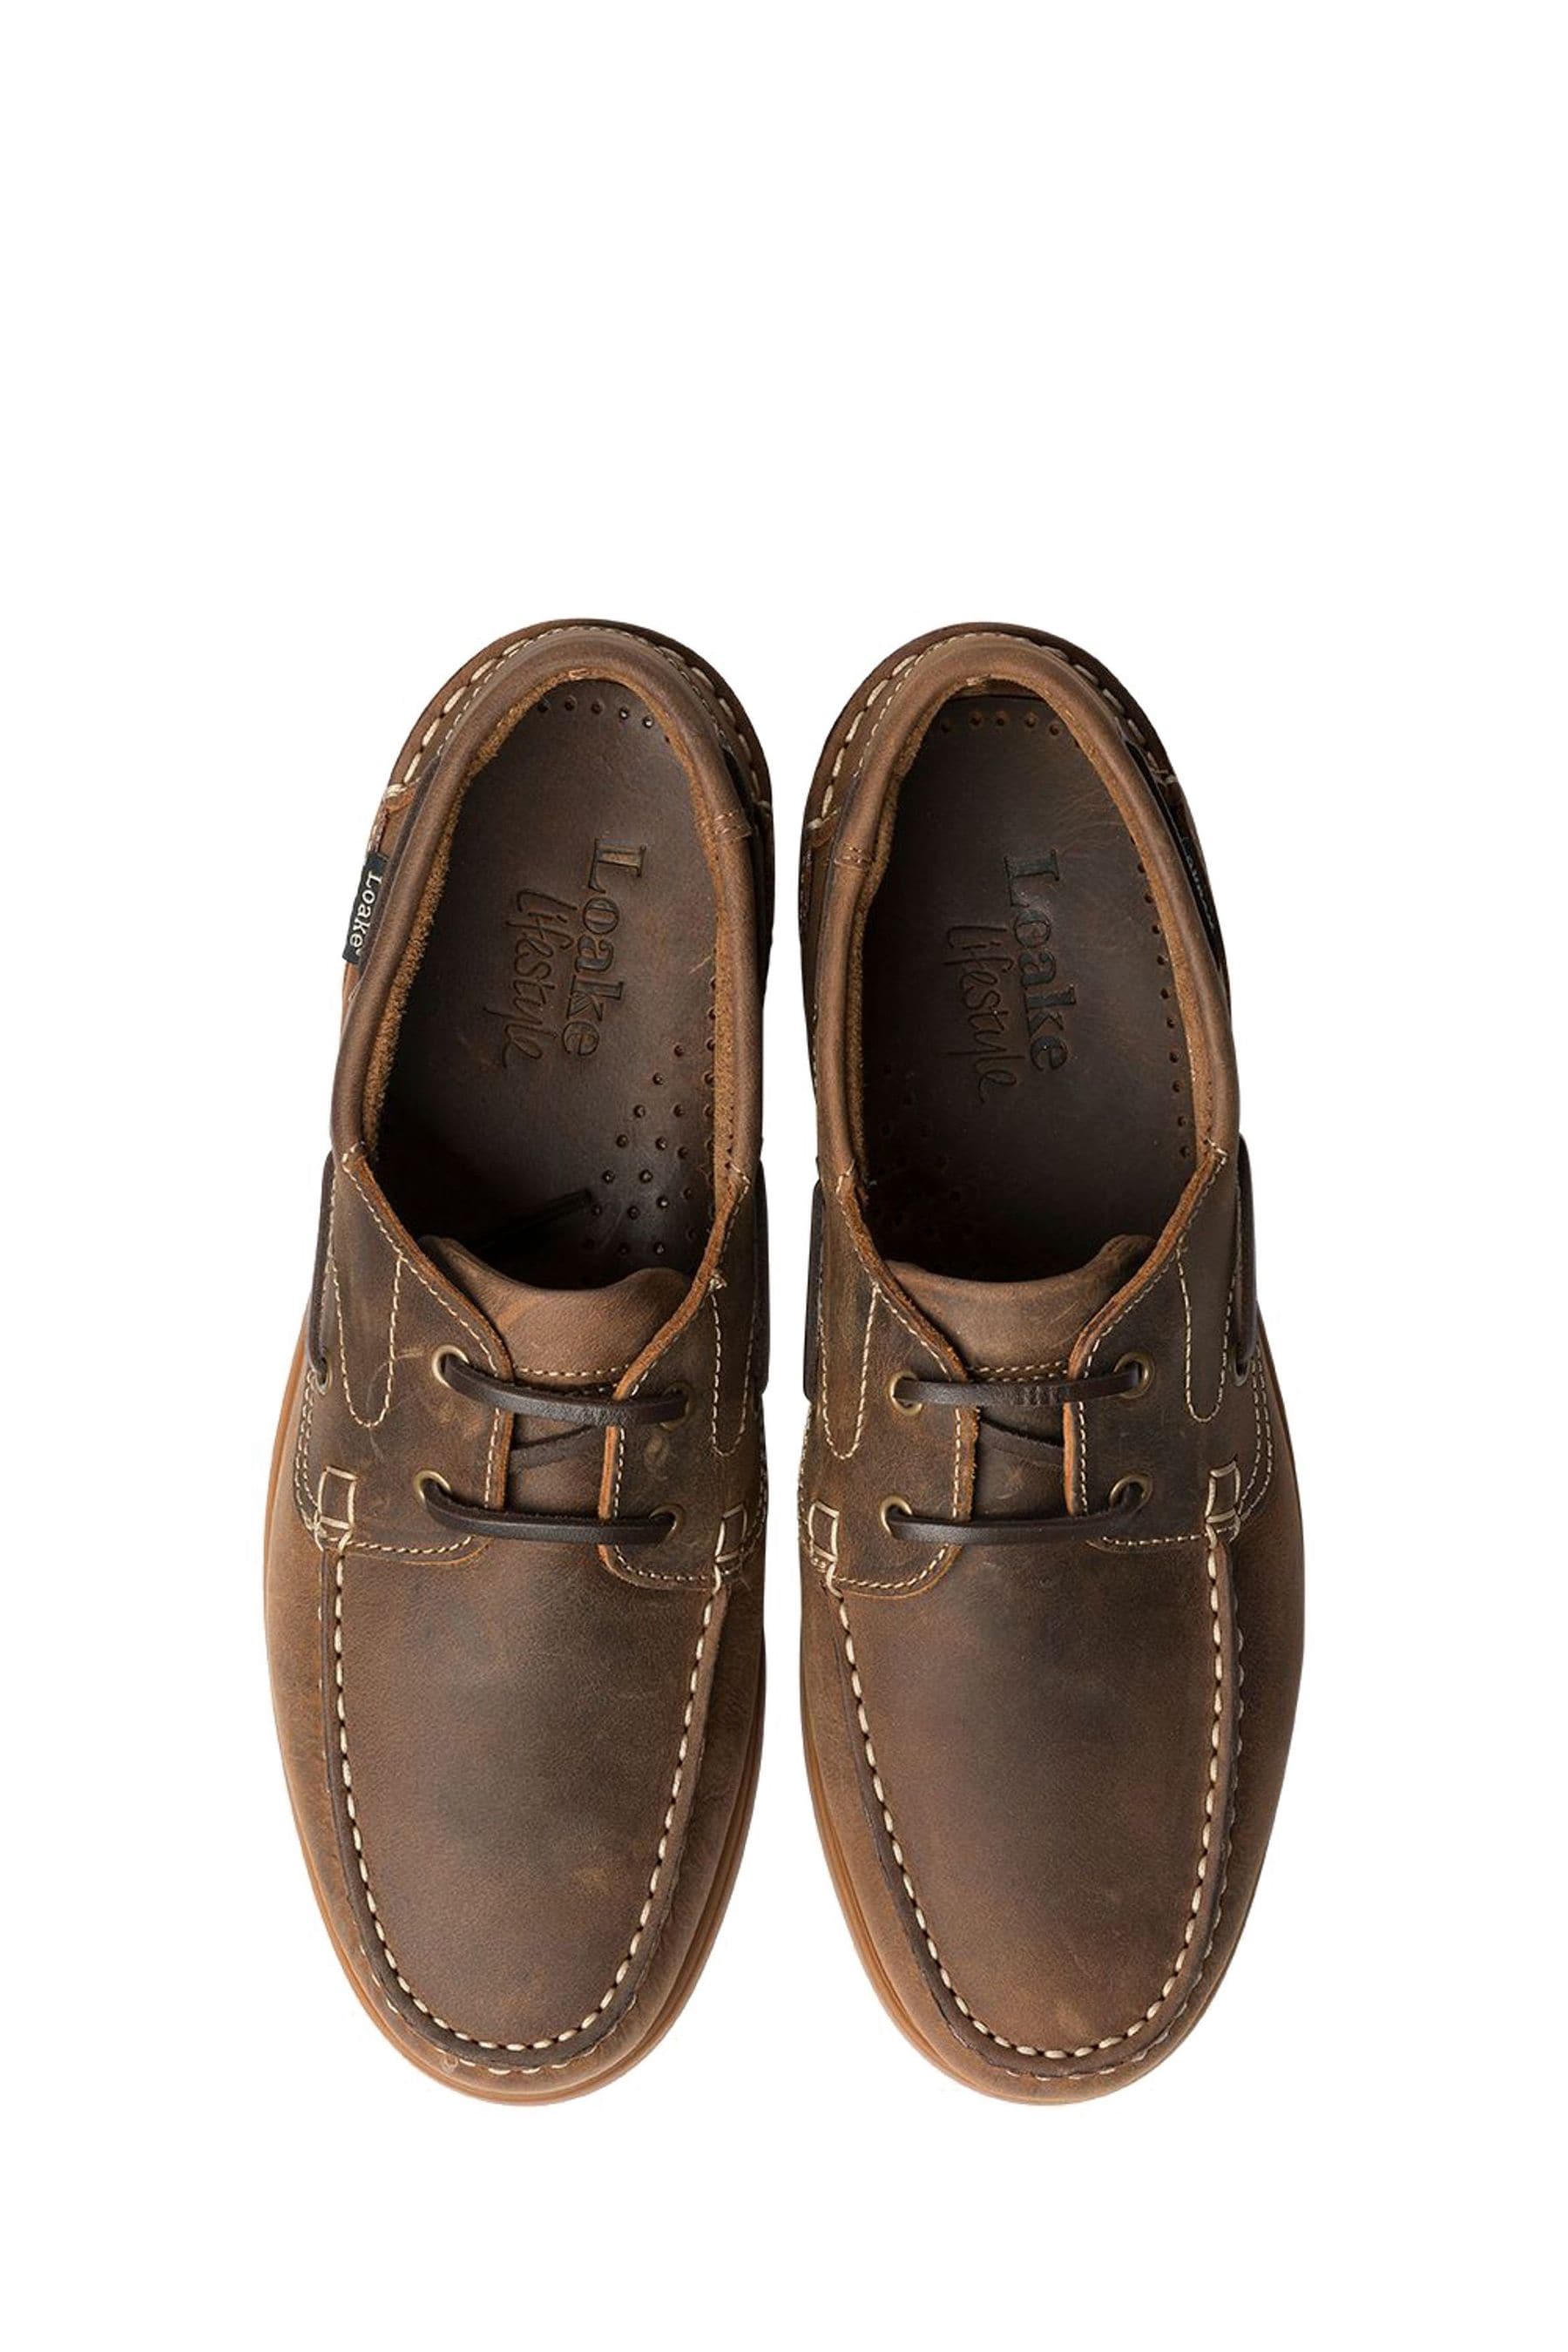 Buy Loake Crazy Horse Brown Leather Lymington Boat Shoe from the Next ...